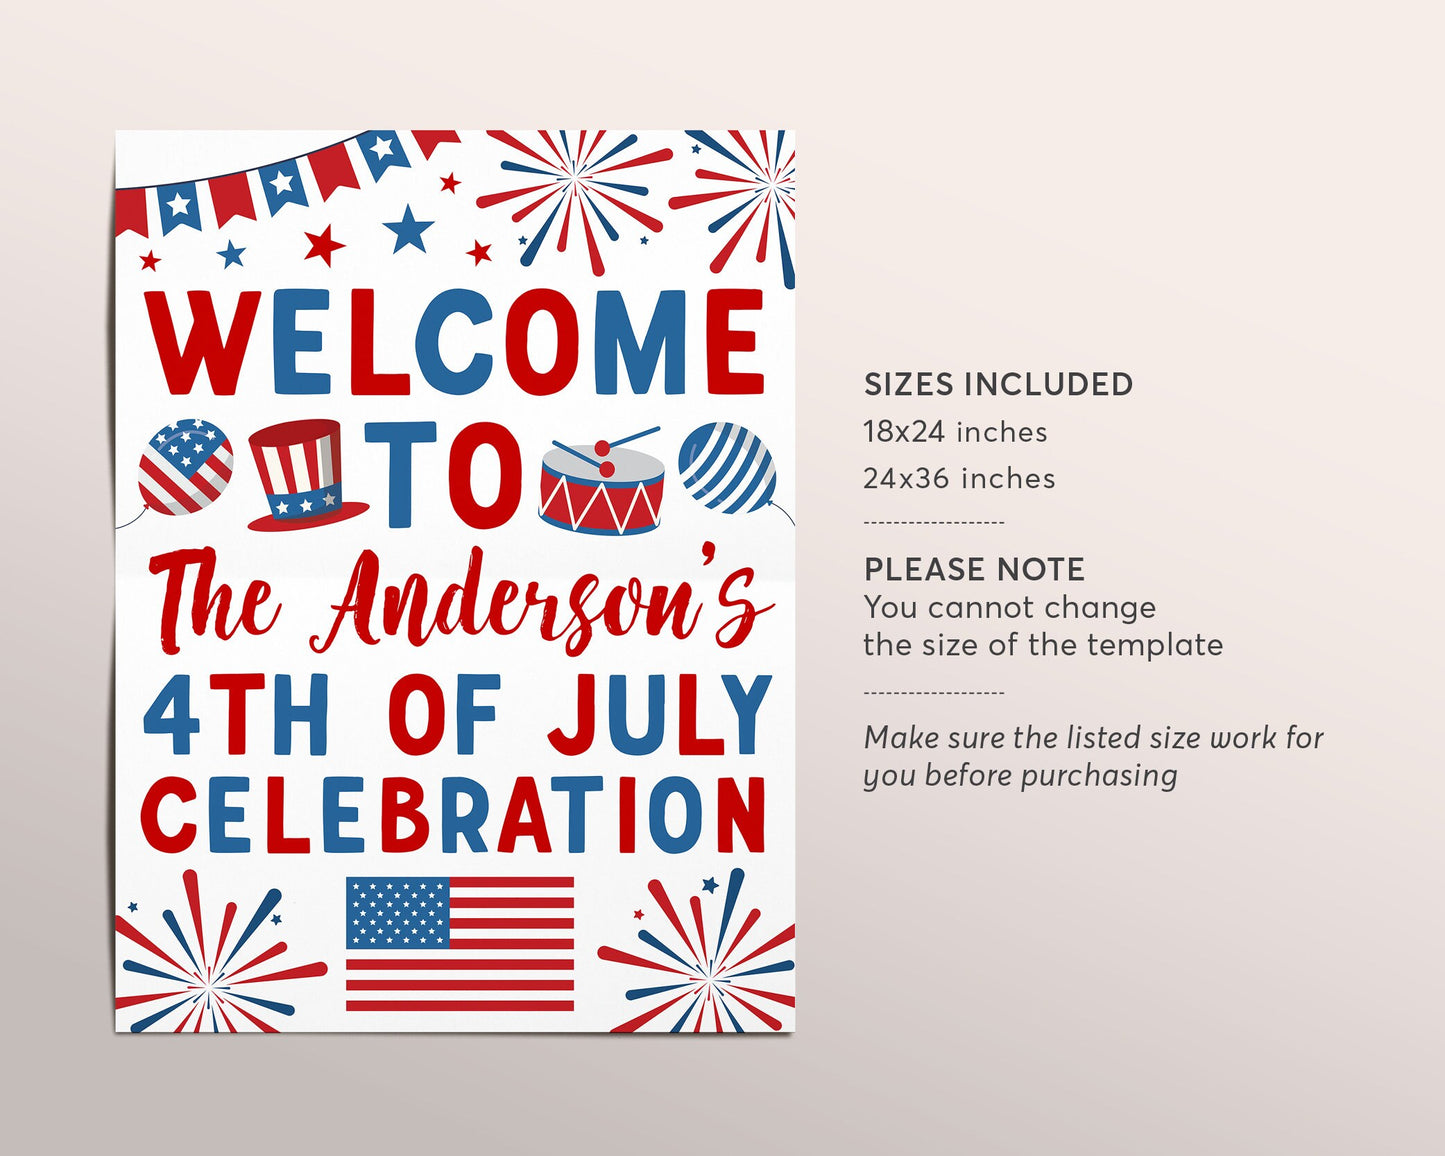 4th of July Celebration Welcome Sign Editable Template, Fourth of July BBQ Block Party Decorations, Independence Day Poster Fireworks